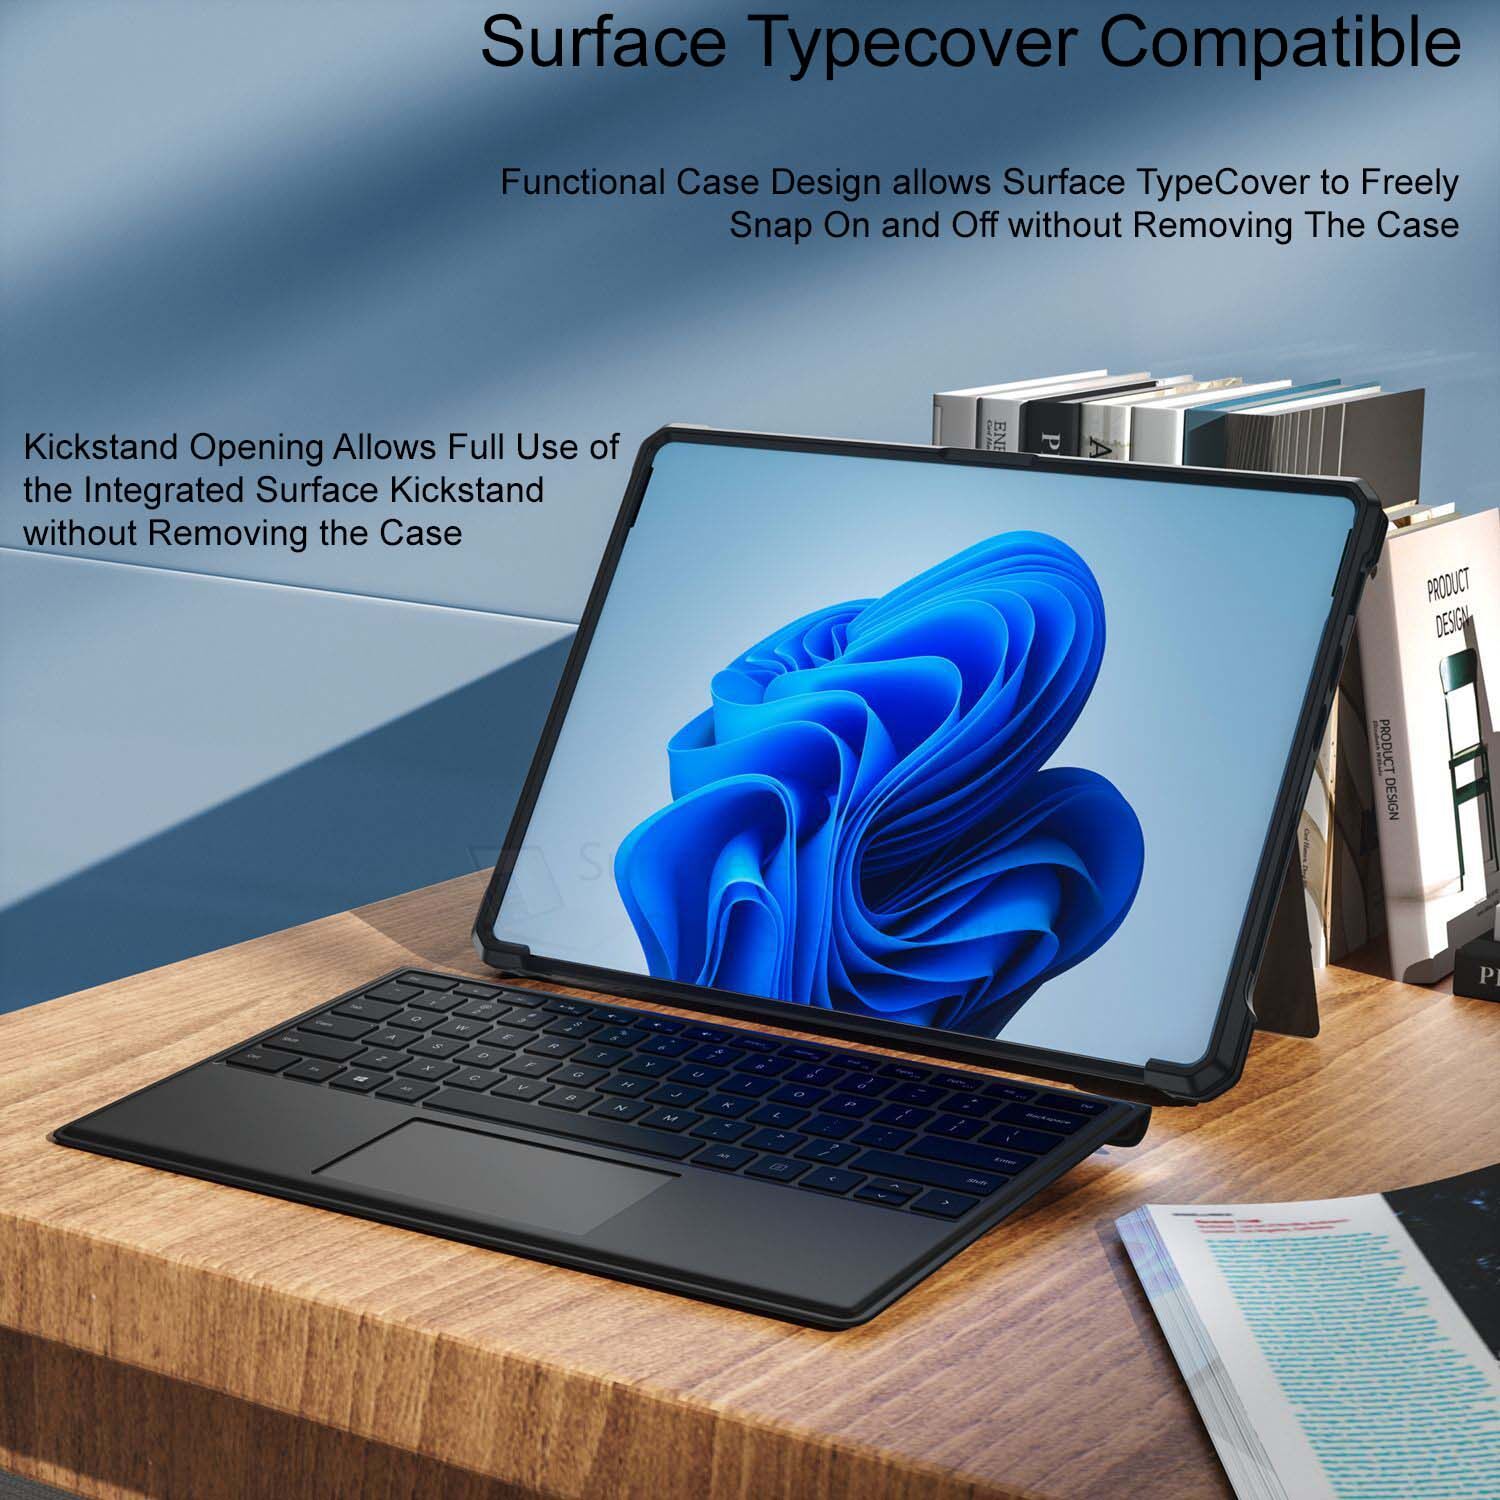 [MALAYSIA]Microsoft Surface Pro 8 Rugged Casing Microsoft Surface Pro 8 Rugged Casing Pro 8 Rugged Case Stand Flip Case Surface Pro 8 Protective Case - Includes Kickstand Cover New 2022 / 2023 Version